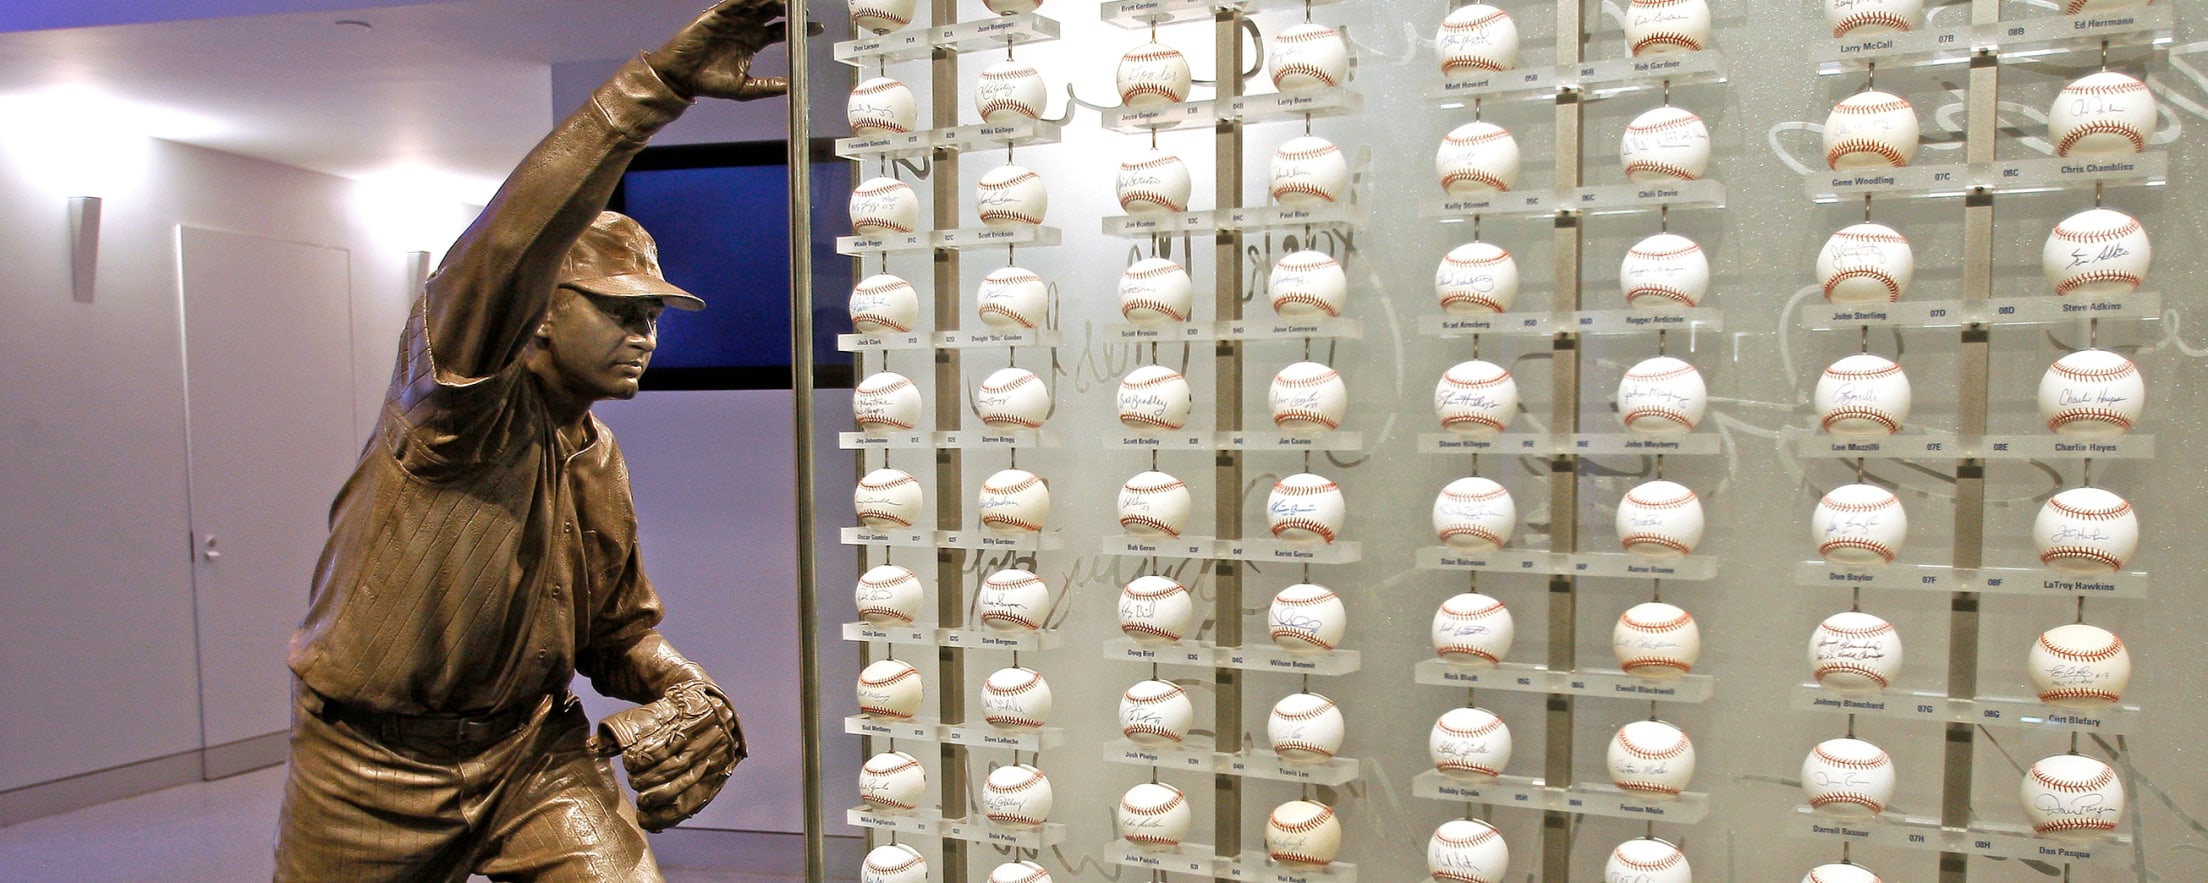 Yogi Berra to have statue in front of his museum - The San Diego